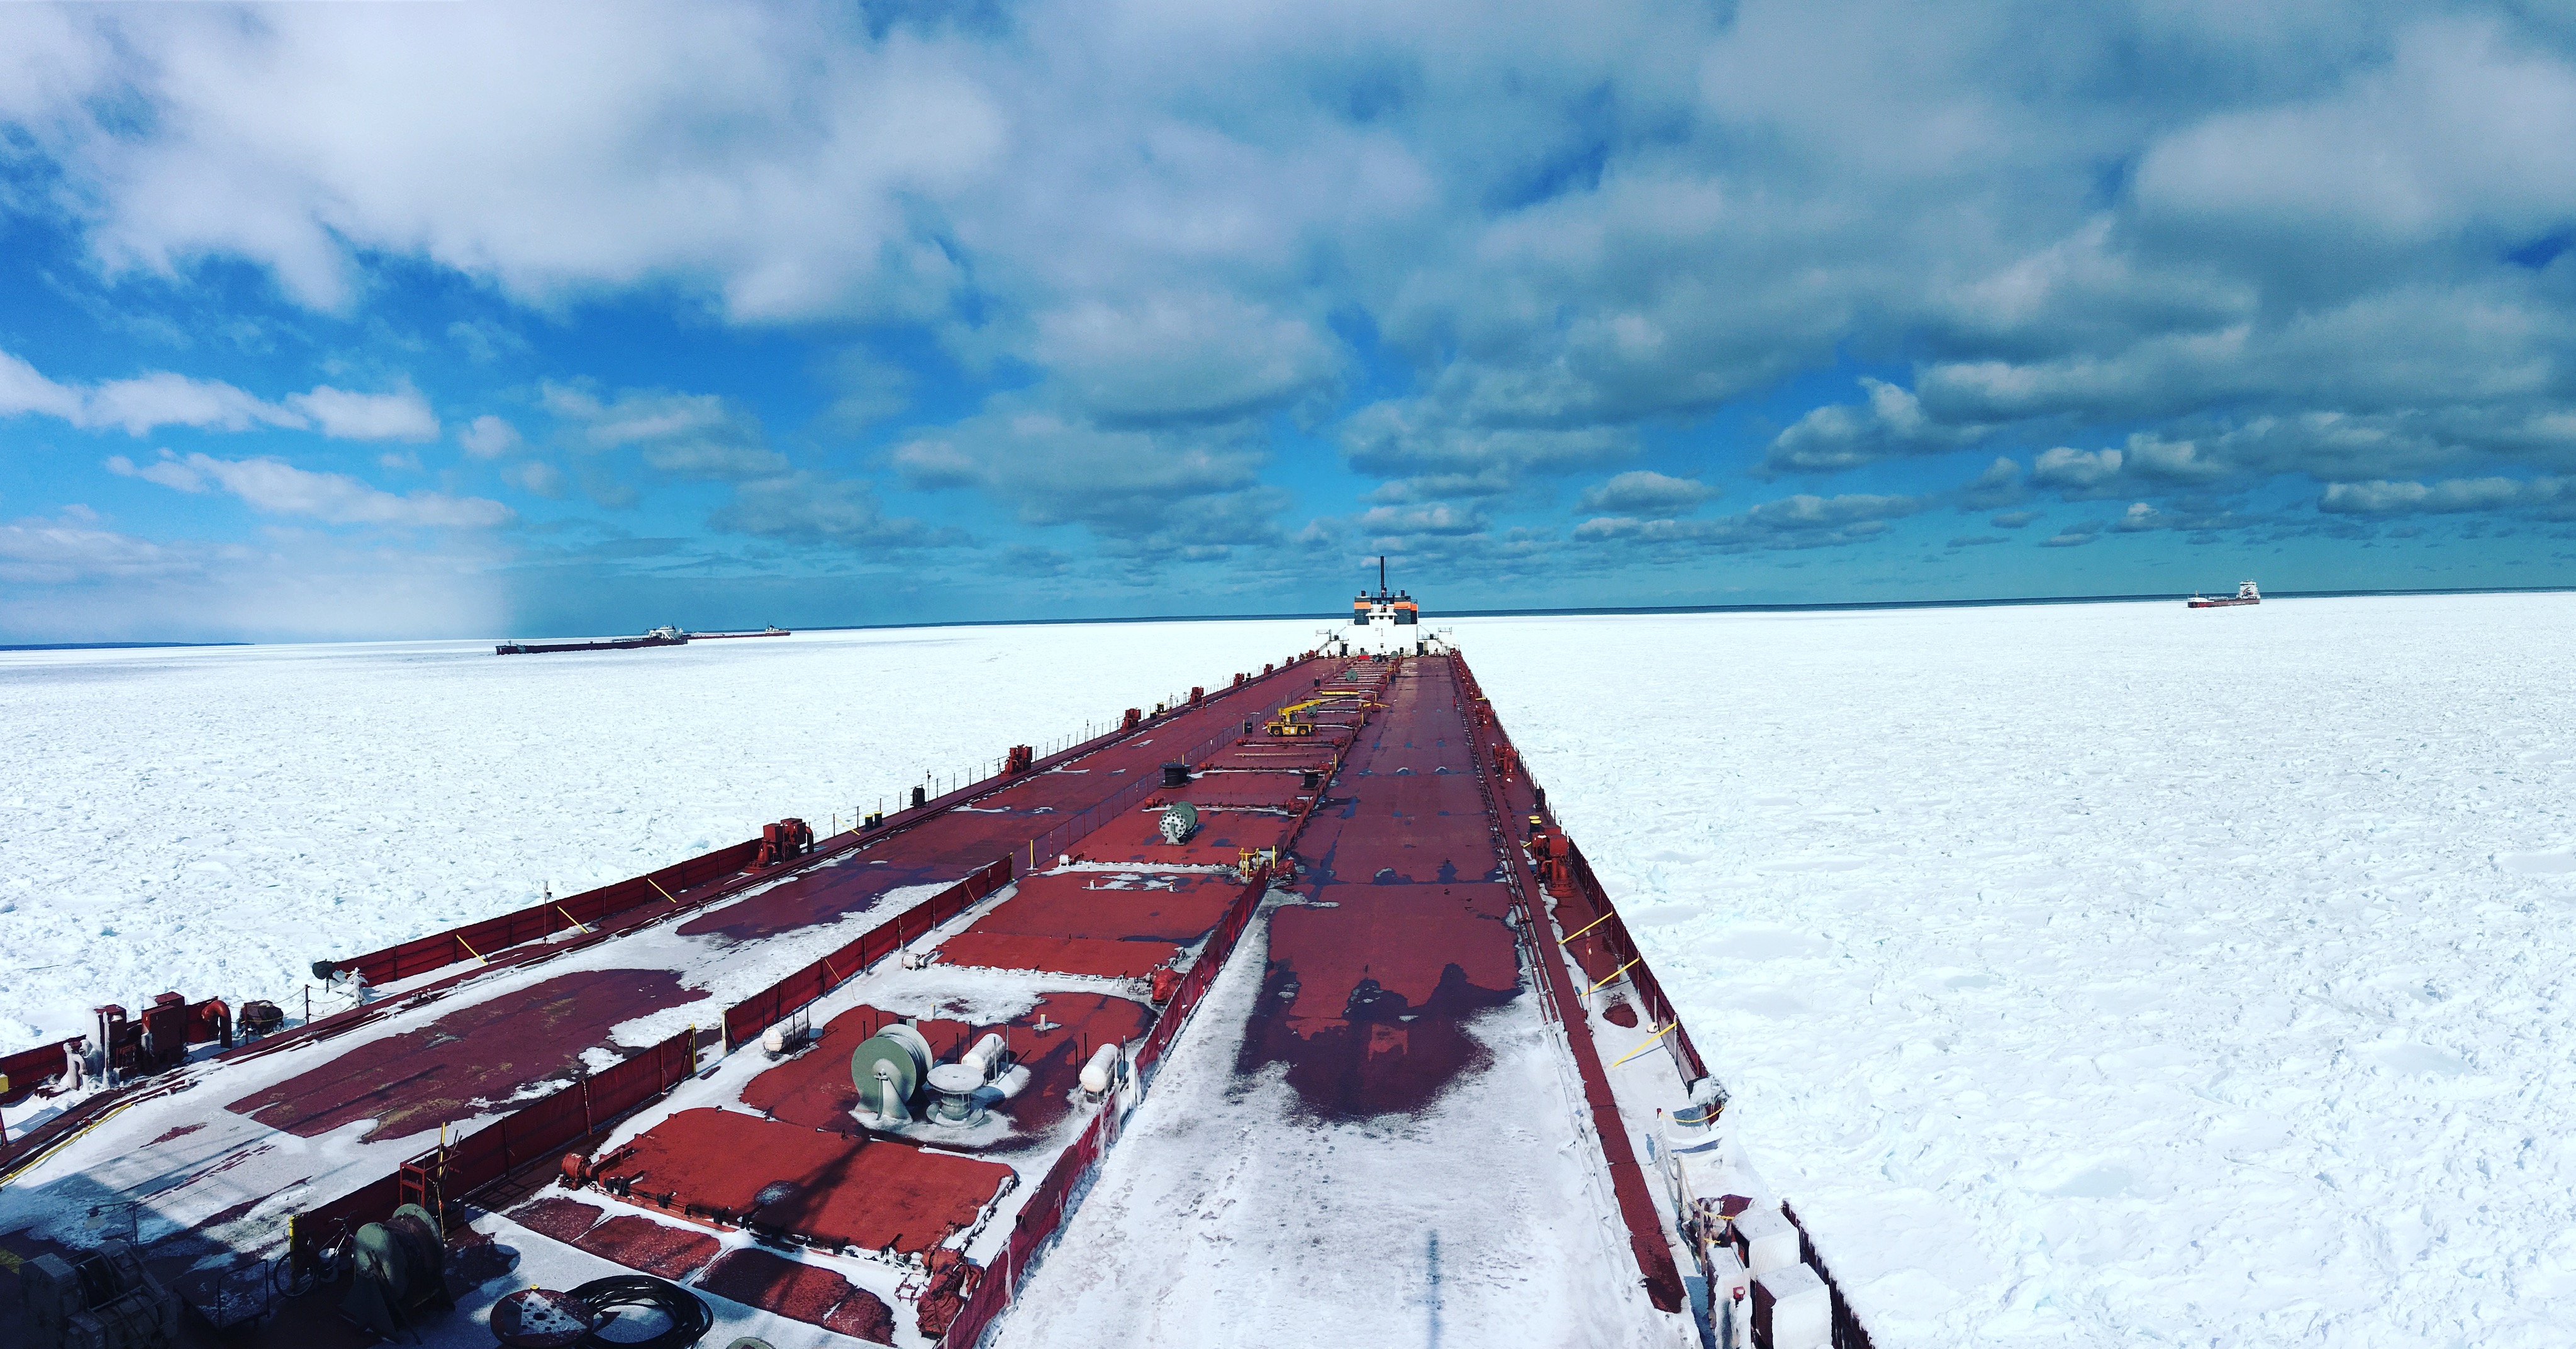 10 years to build a new icebreaker? Great Lakes shippers cry foul 